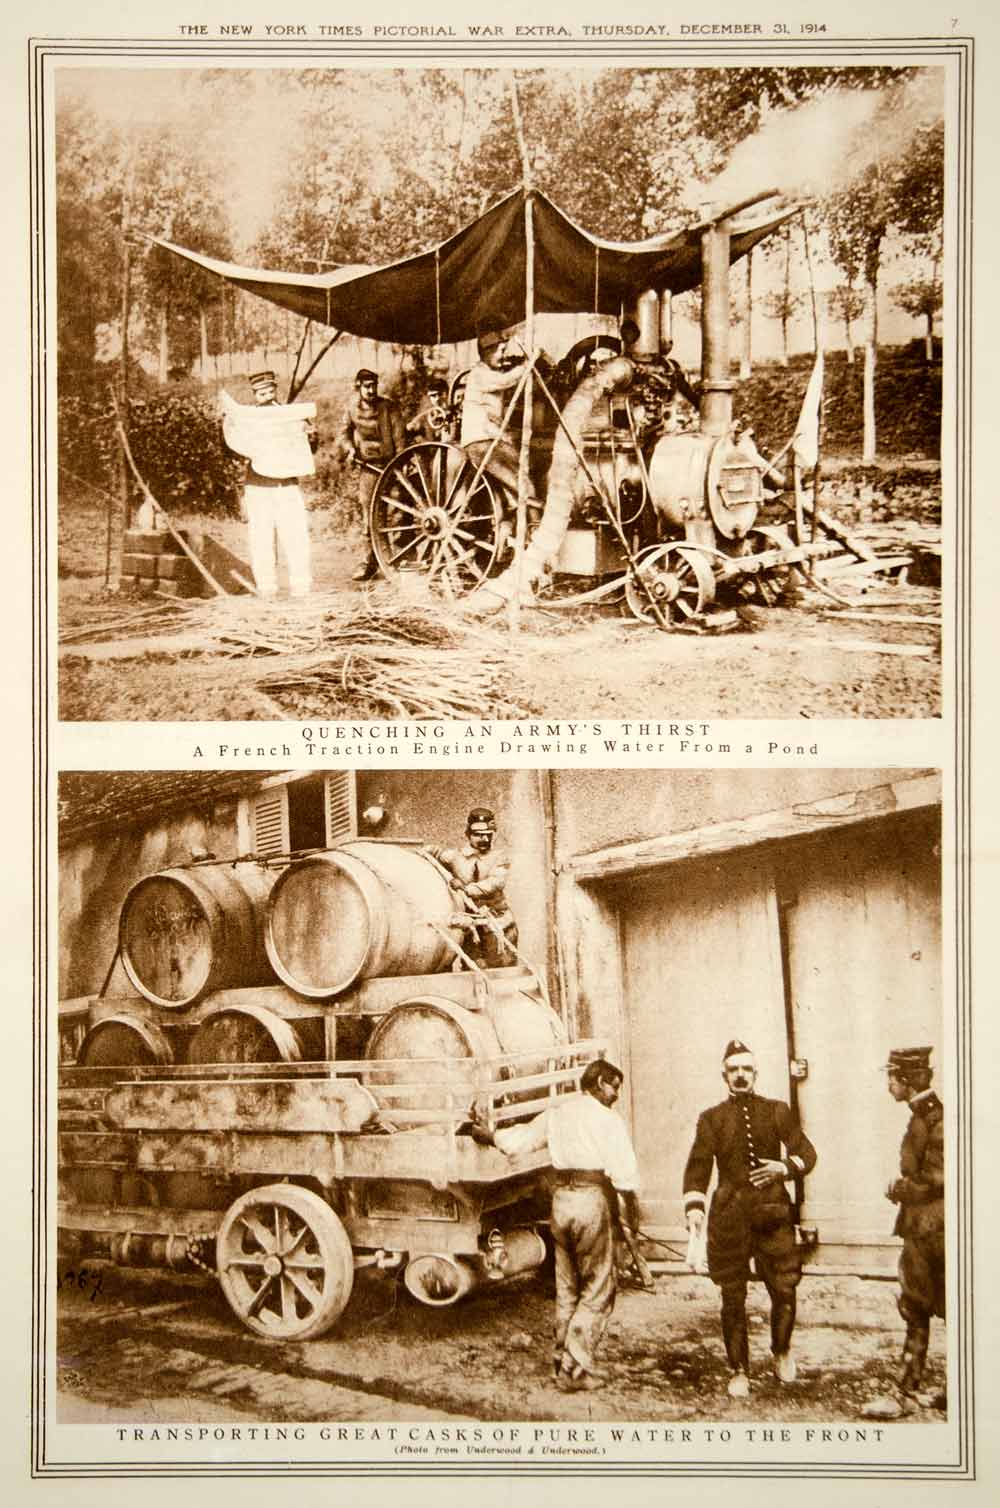 1914 Rotogravure WWI Water Distribution Casks French Traction Engine Front YNY2